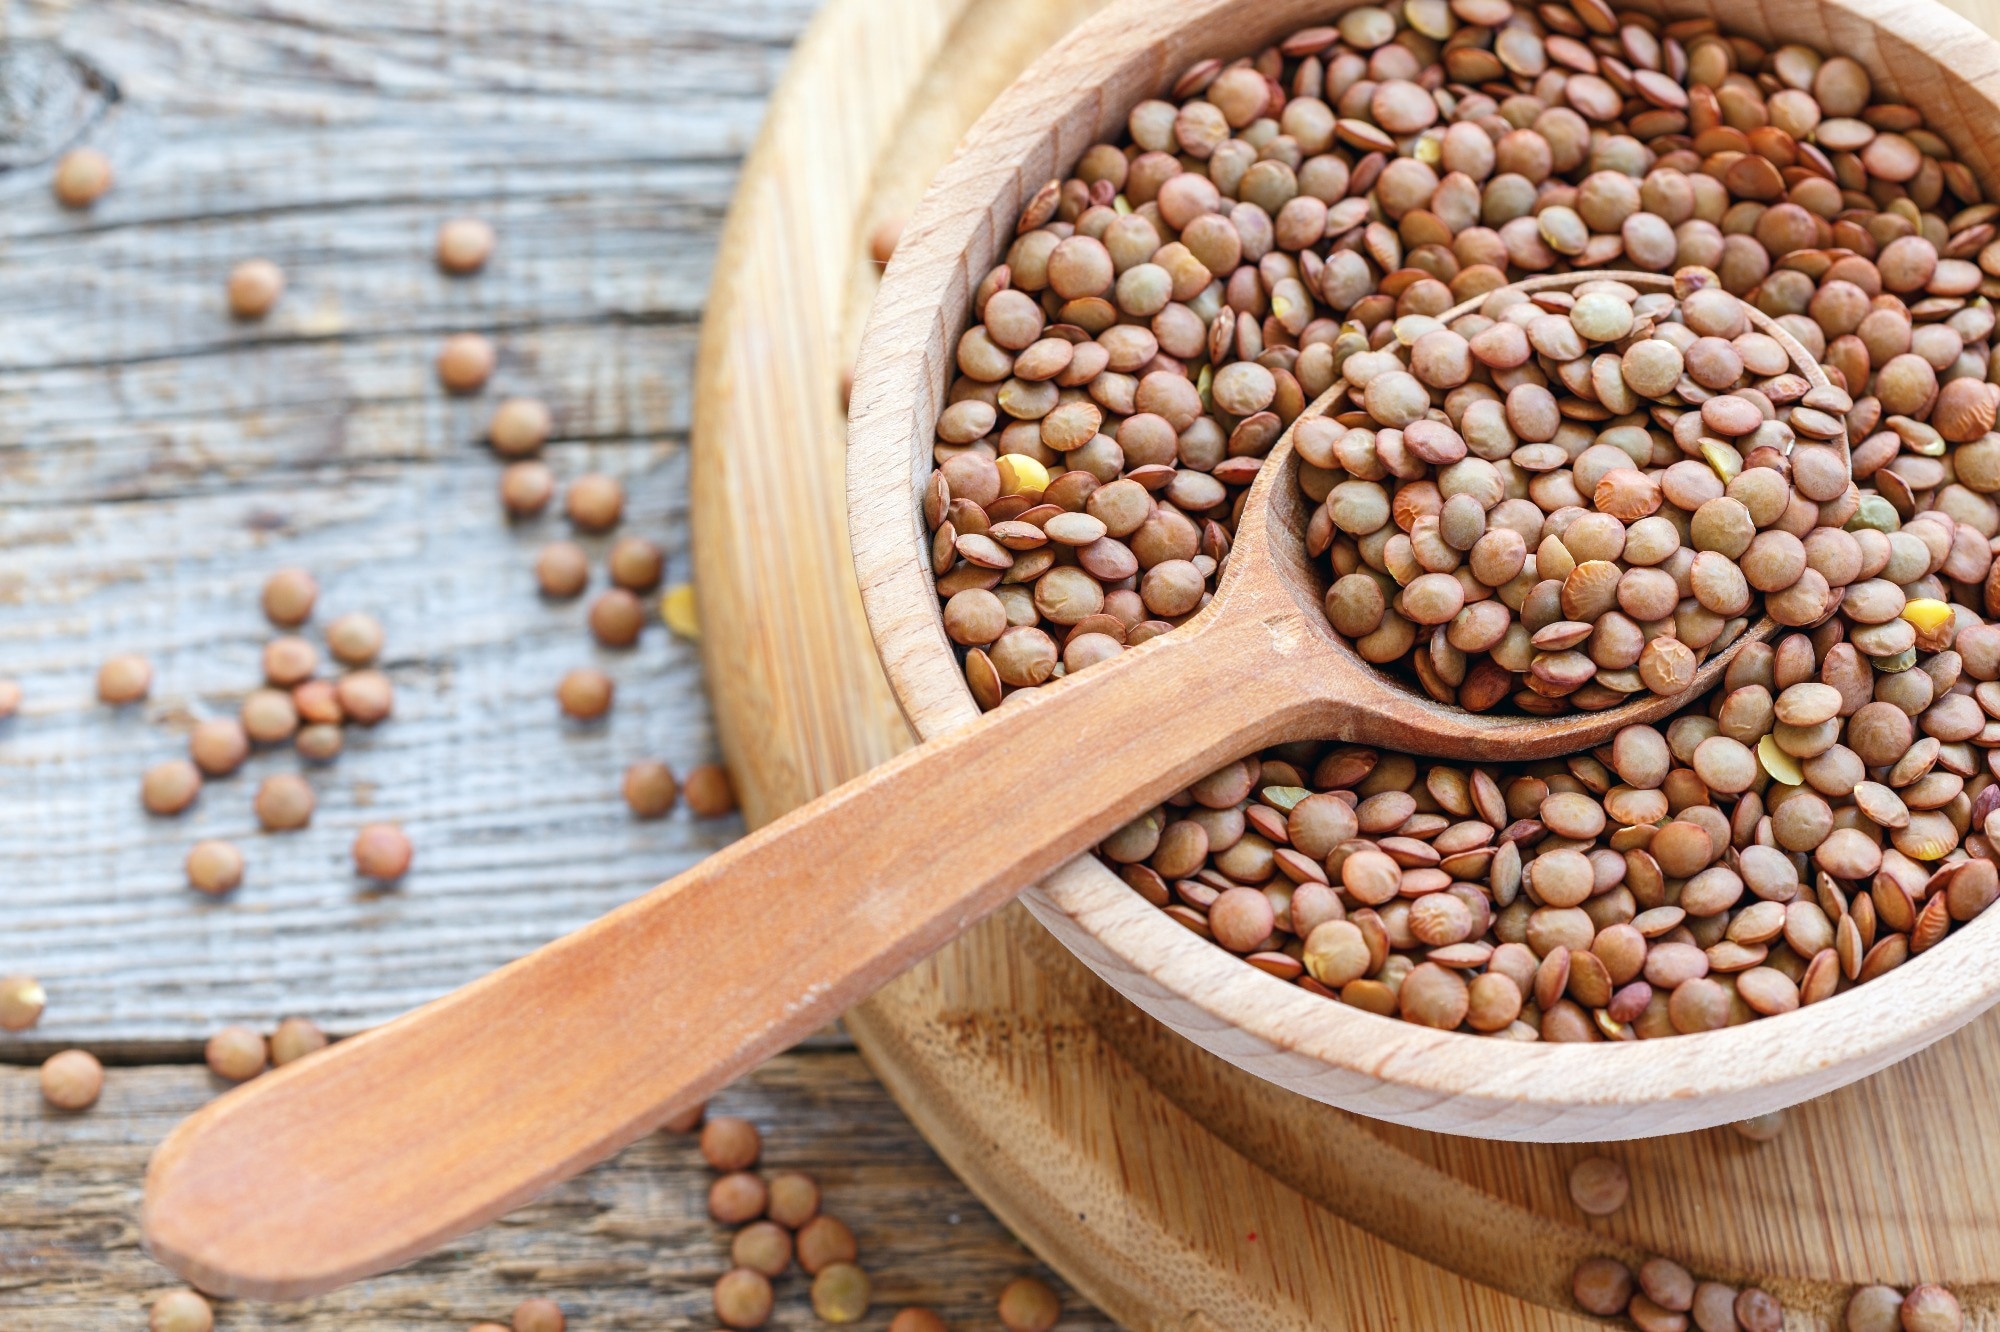 Study: Consumption of iron-fortified lentils is protective against declining iron status among adolescent girls in Bangladesh: evidence from a community-based double-blind, cluster-randomized controlled trial. Image Credit: SMarina/Shutterstock.com